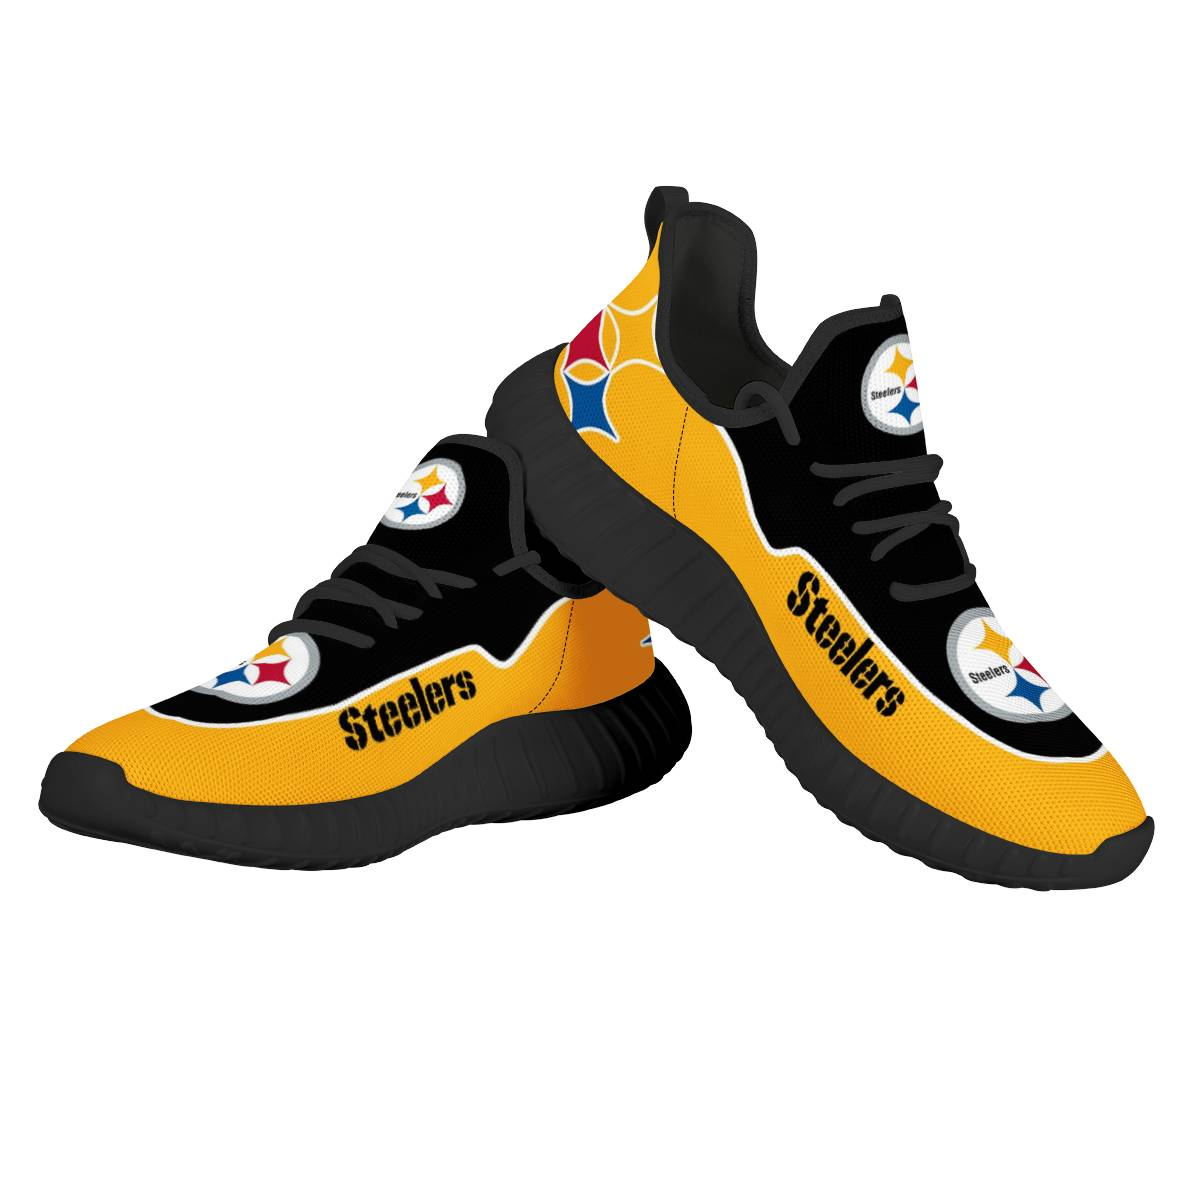 Men's NFL Pittsburgh Steelers Mesh Knit Sneakers/Shoes 014